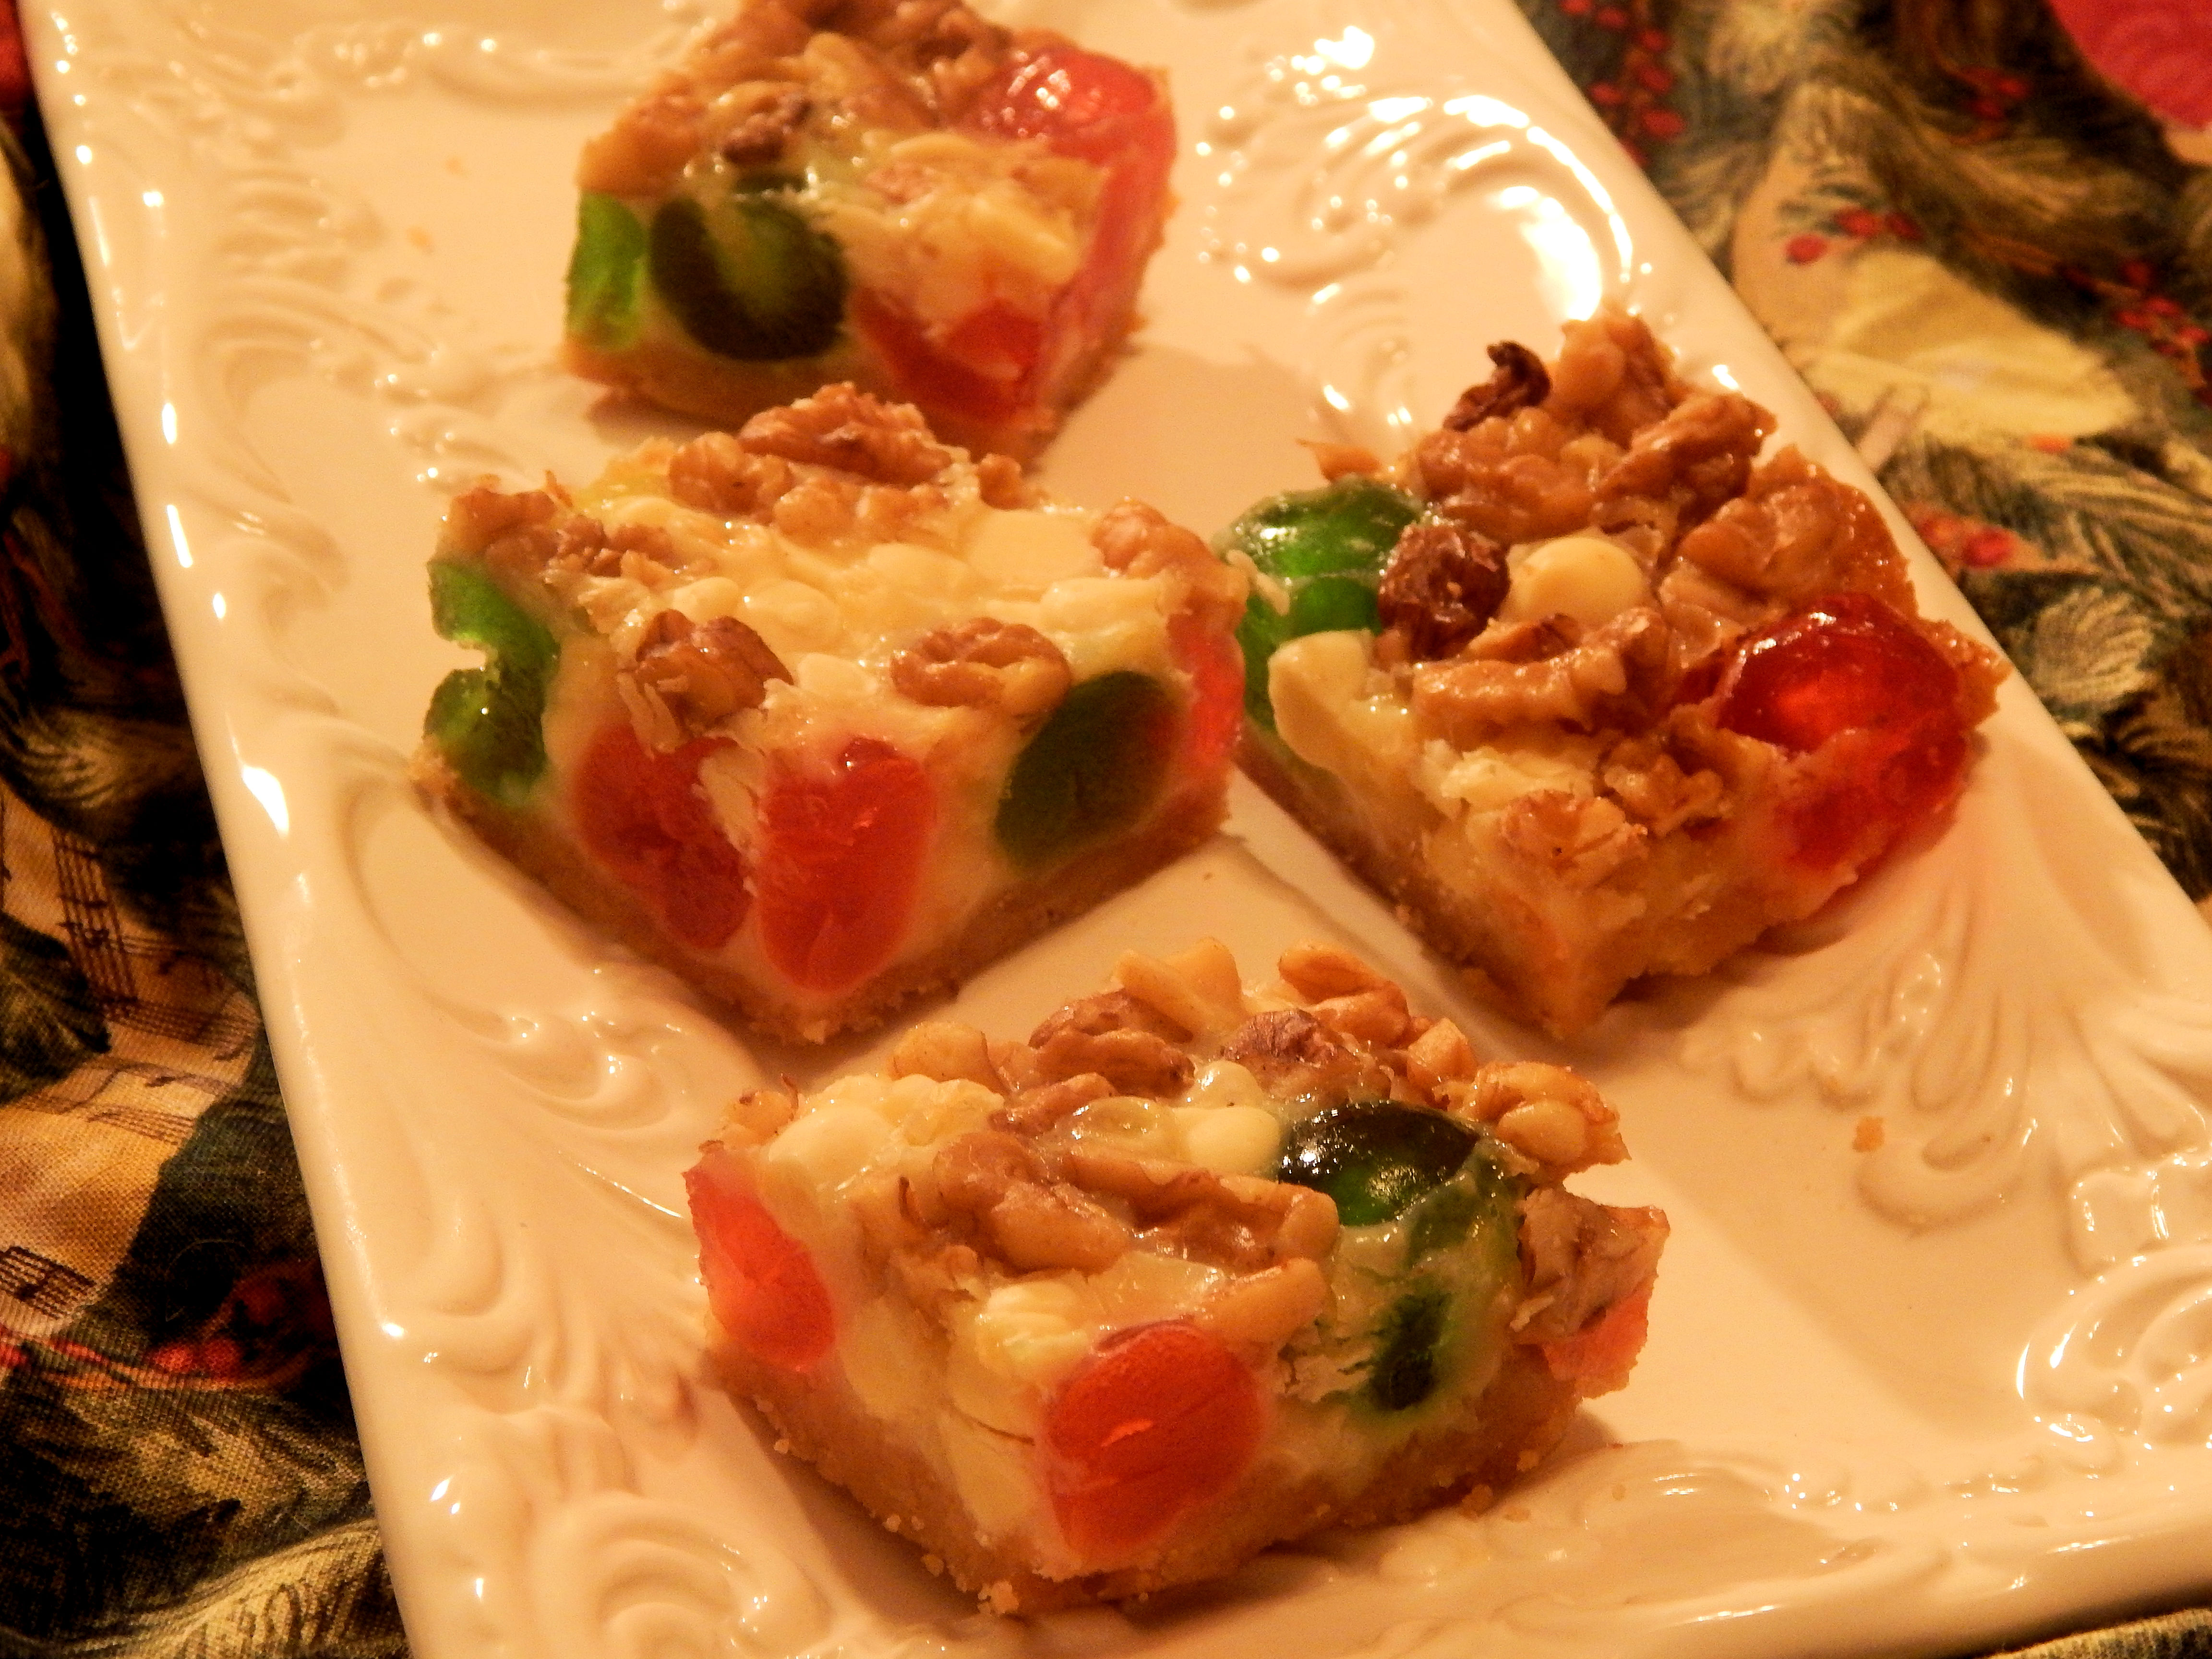 White Chocolate and Candied Fruit Magic Cookie Bars